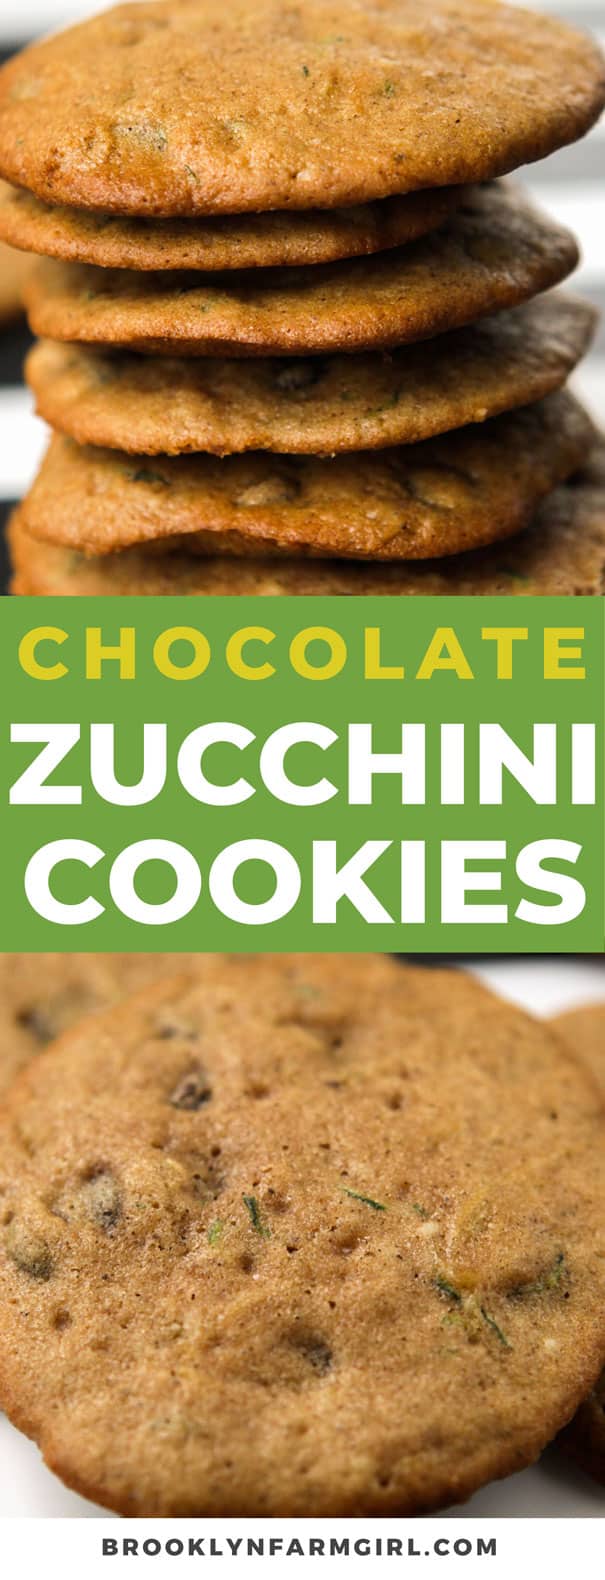 Let’s bake some EASY Chocolate Chip Zucchini Cookies! If you love a crispy, crunchy cookie, this cookie recipe is for you. These cookies could not be more simple to whip up and they’re ready to eat in just 15 minutes! They’re so scrumptious your kids won’t even mind the vegetables we’re adding into these cookies!